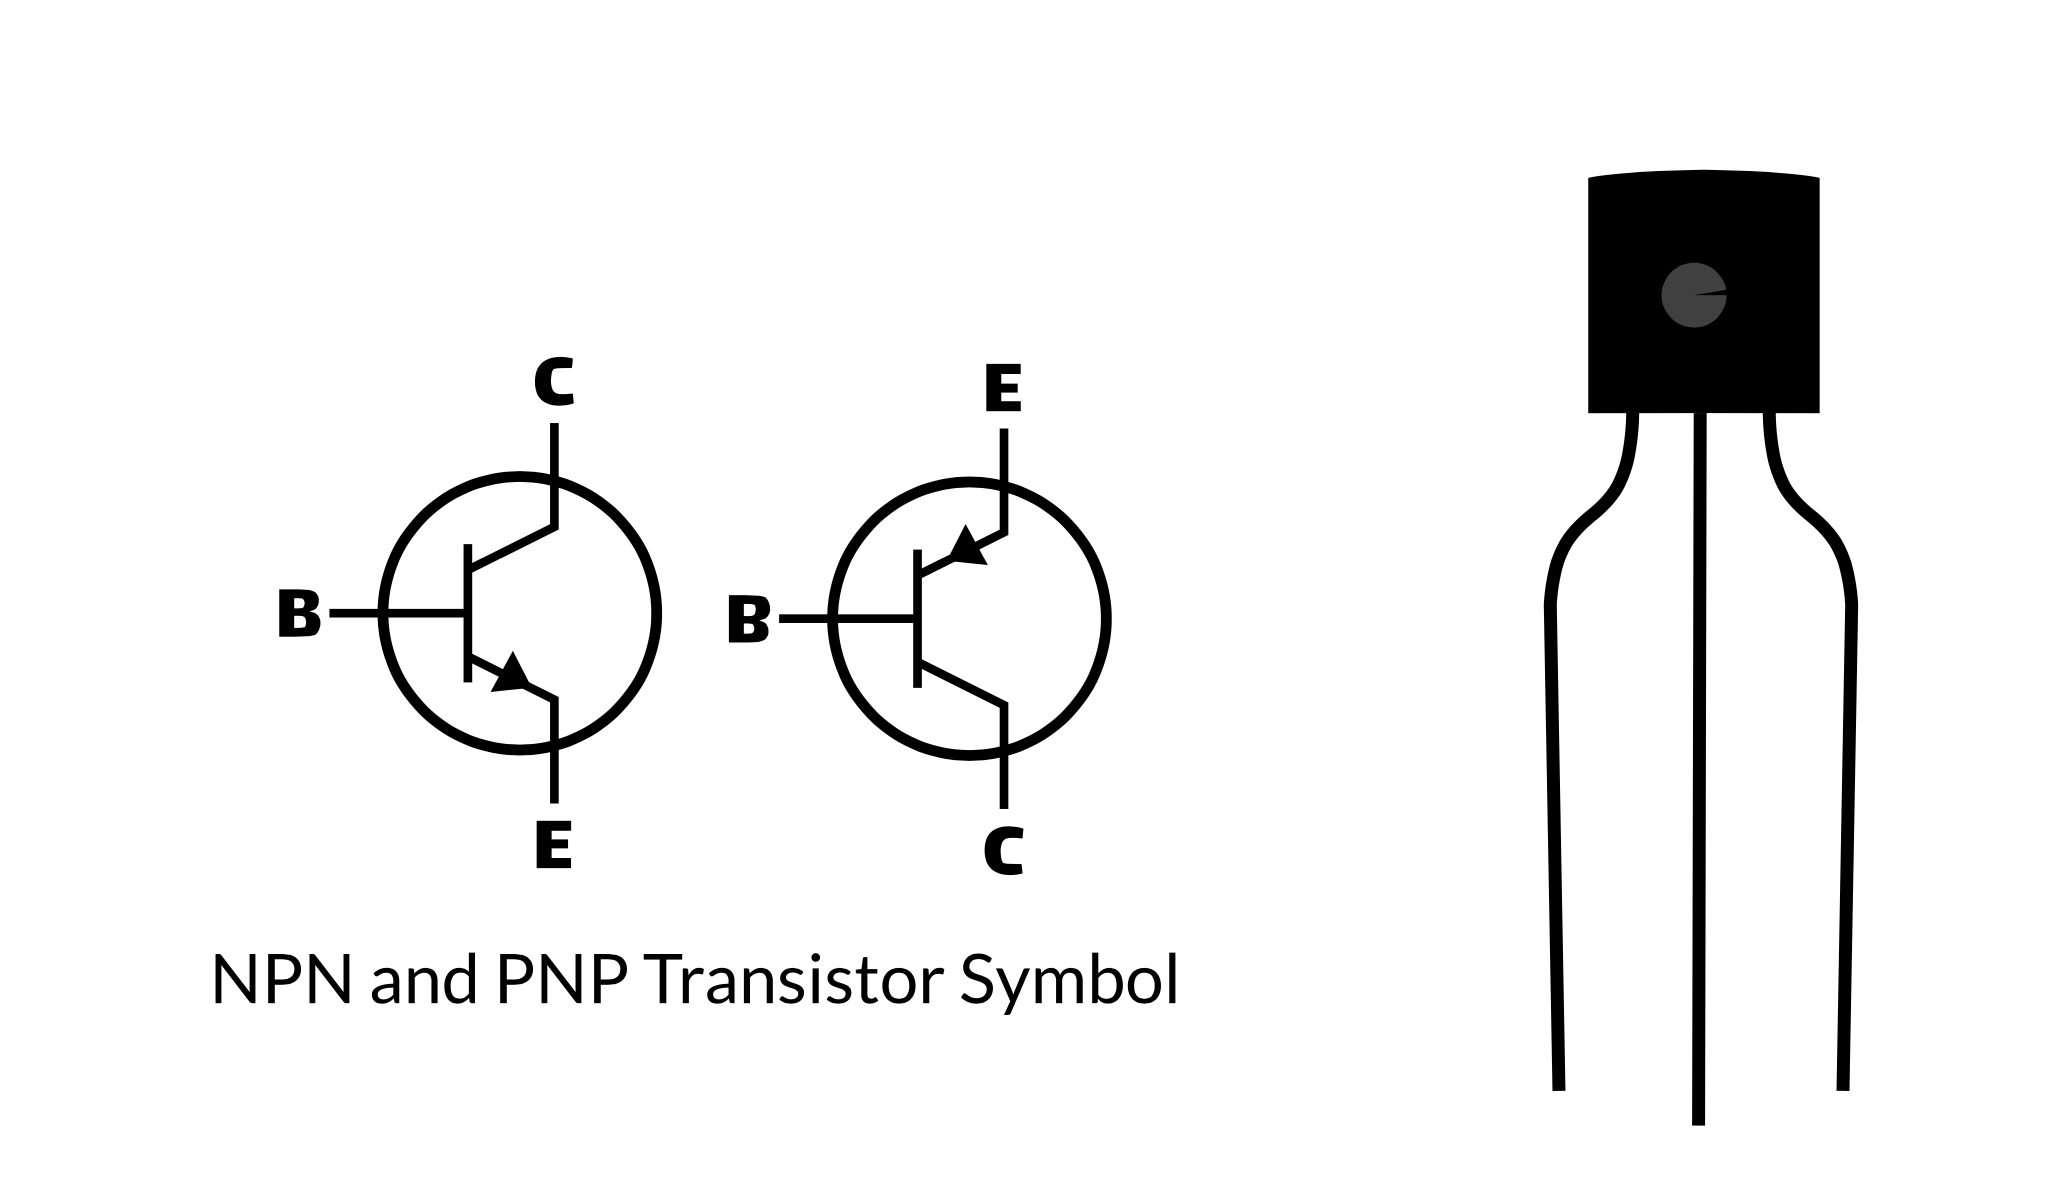 Transistor vector part of electrical component icons. This transistor icon including type of transistor scheme electric. Lose transistor ready for electric soldering equipment chip.